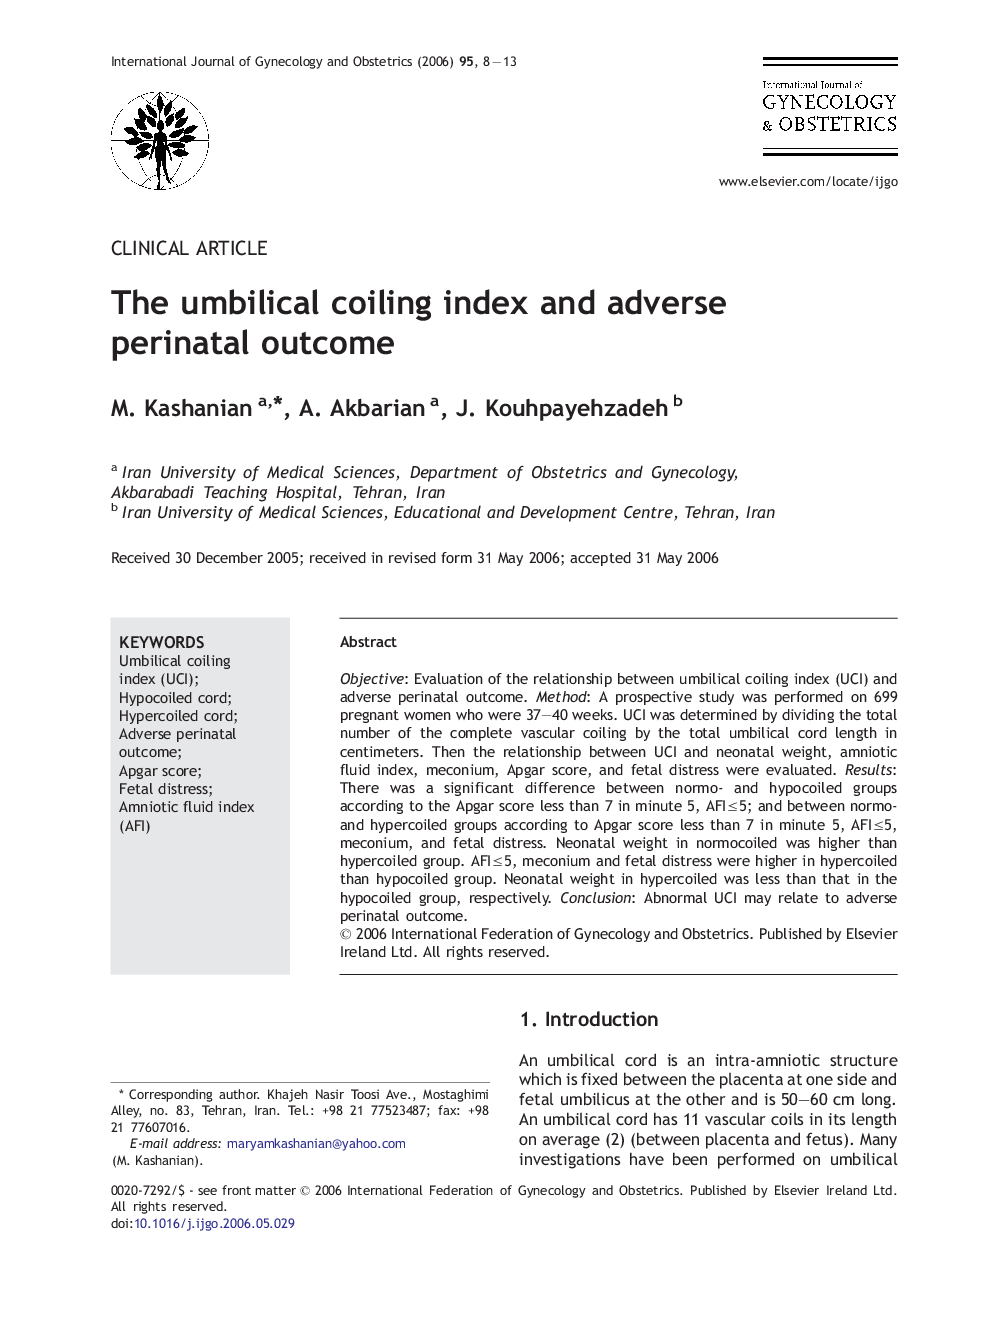 The umbilical coiling index and adverse perinatal outcome